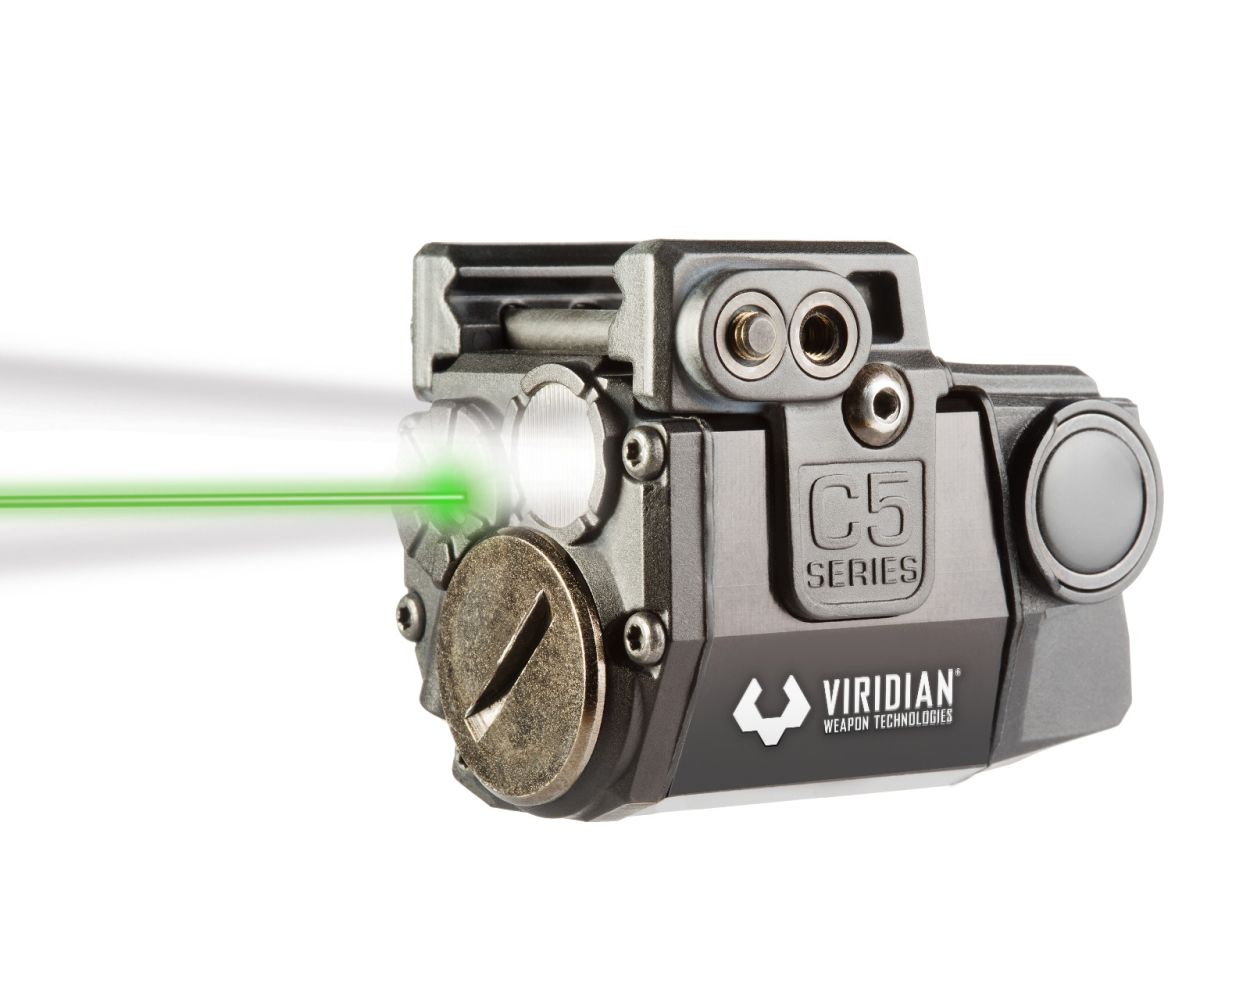 VIRIDIAN C5/C5L Review: Pros and cons of the VIRIDIAN C5/C5L